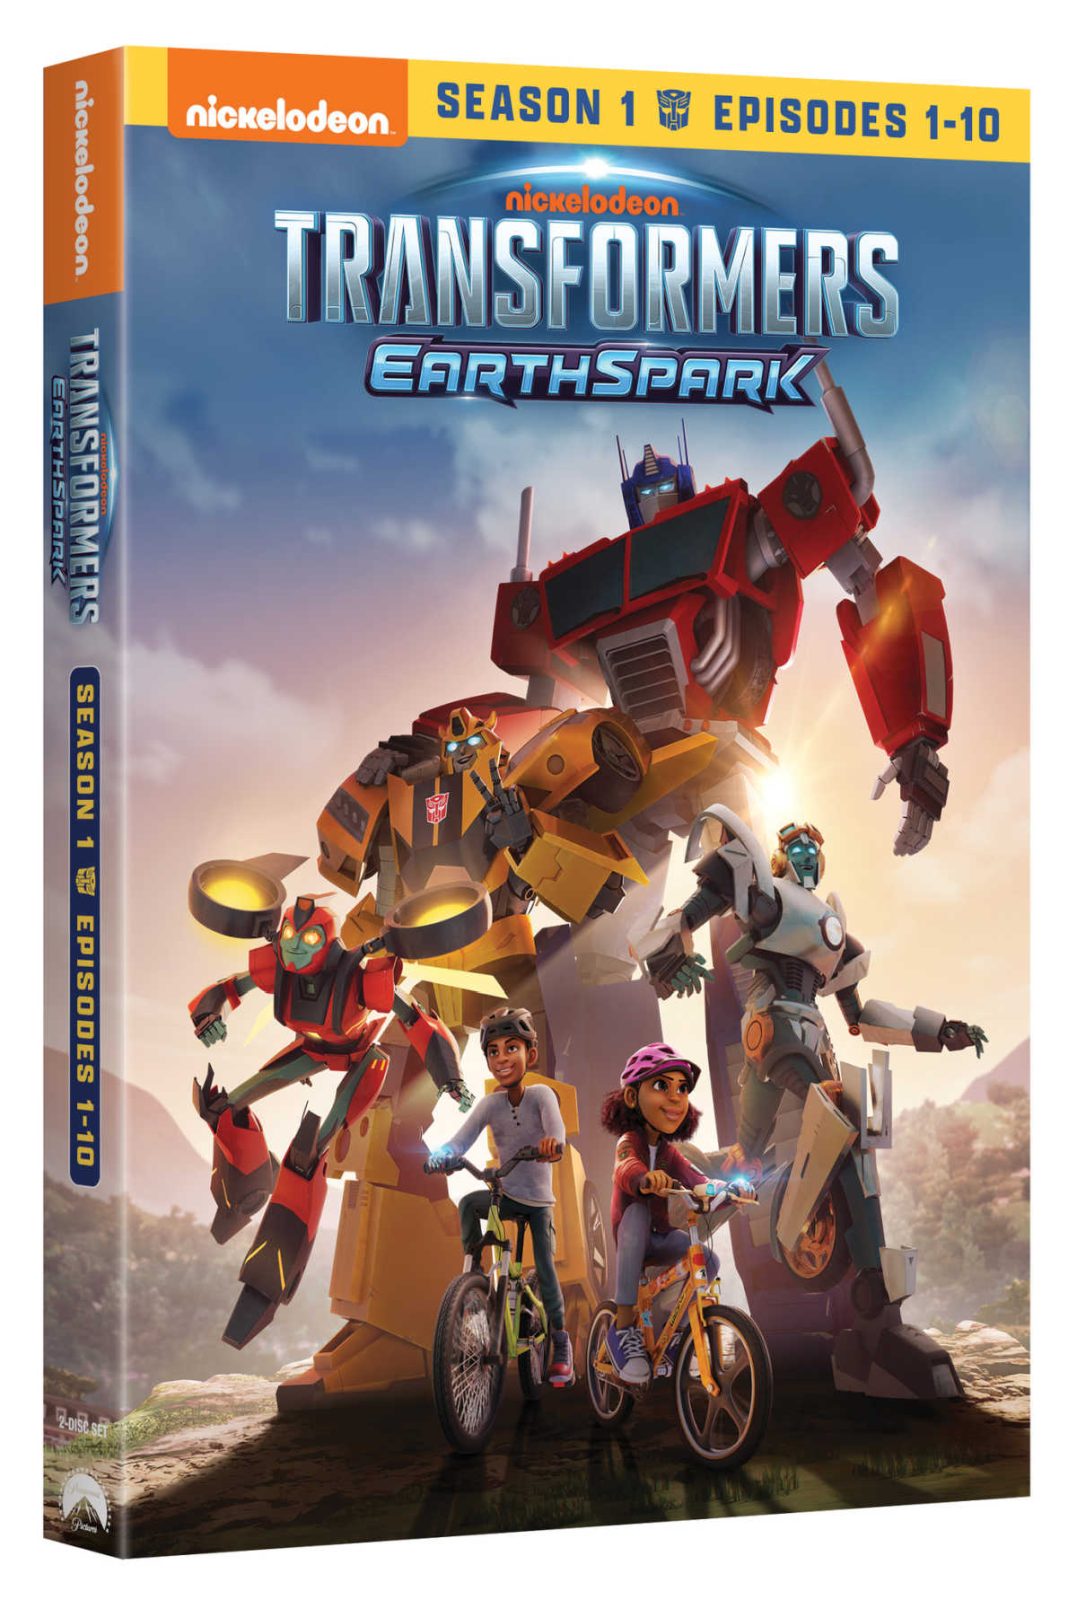 The Transformers EarthSpark two disc DVD set is the perfect gift for any child who loves action, adventure, and robots.